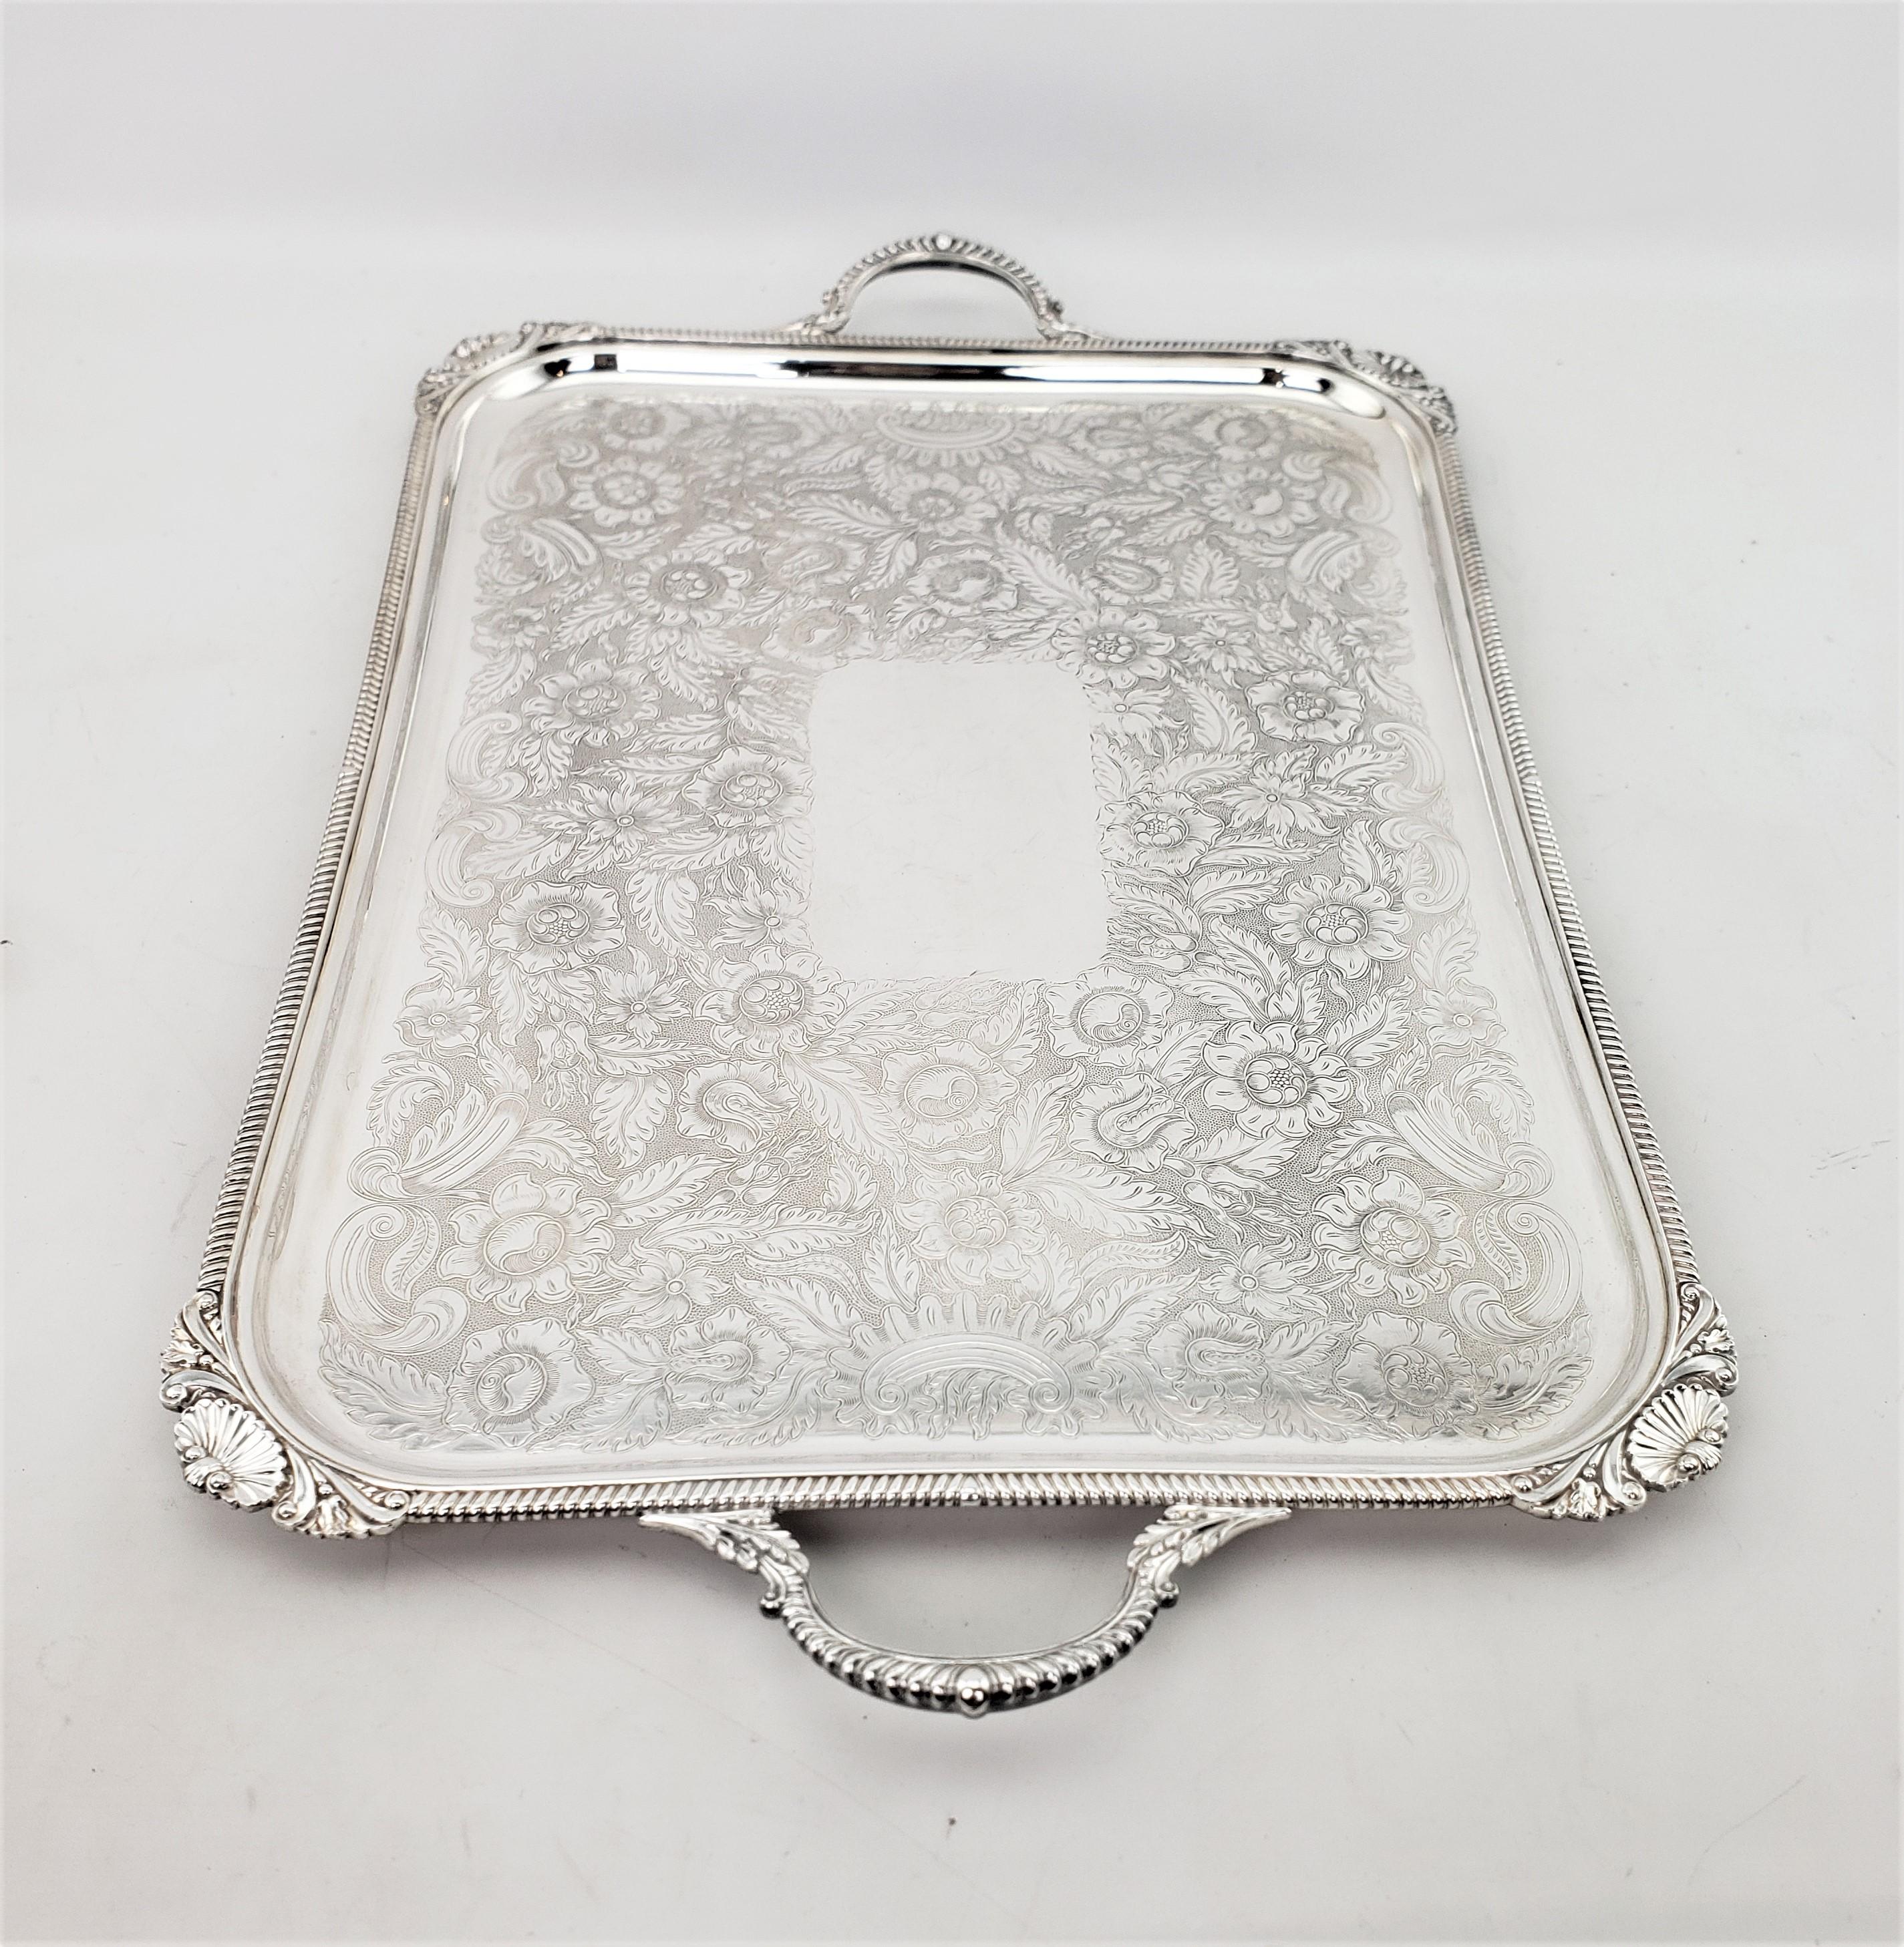 Antique Birks Large Silver Plated Rectangular Serving Tray with Floral Engraving In Good Condition For Sale In Hamilton, Ontario